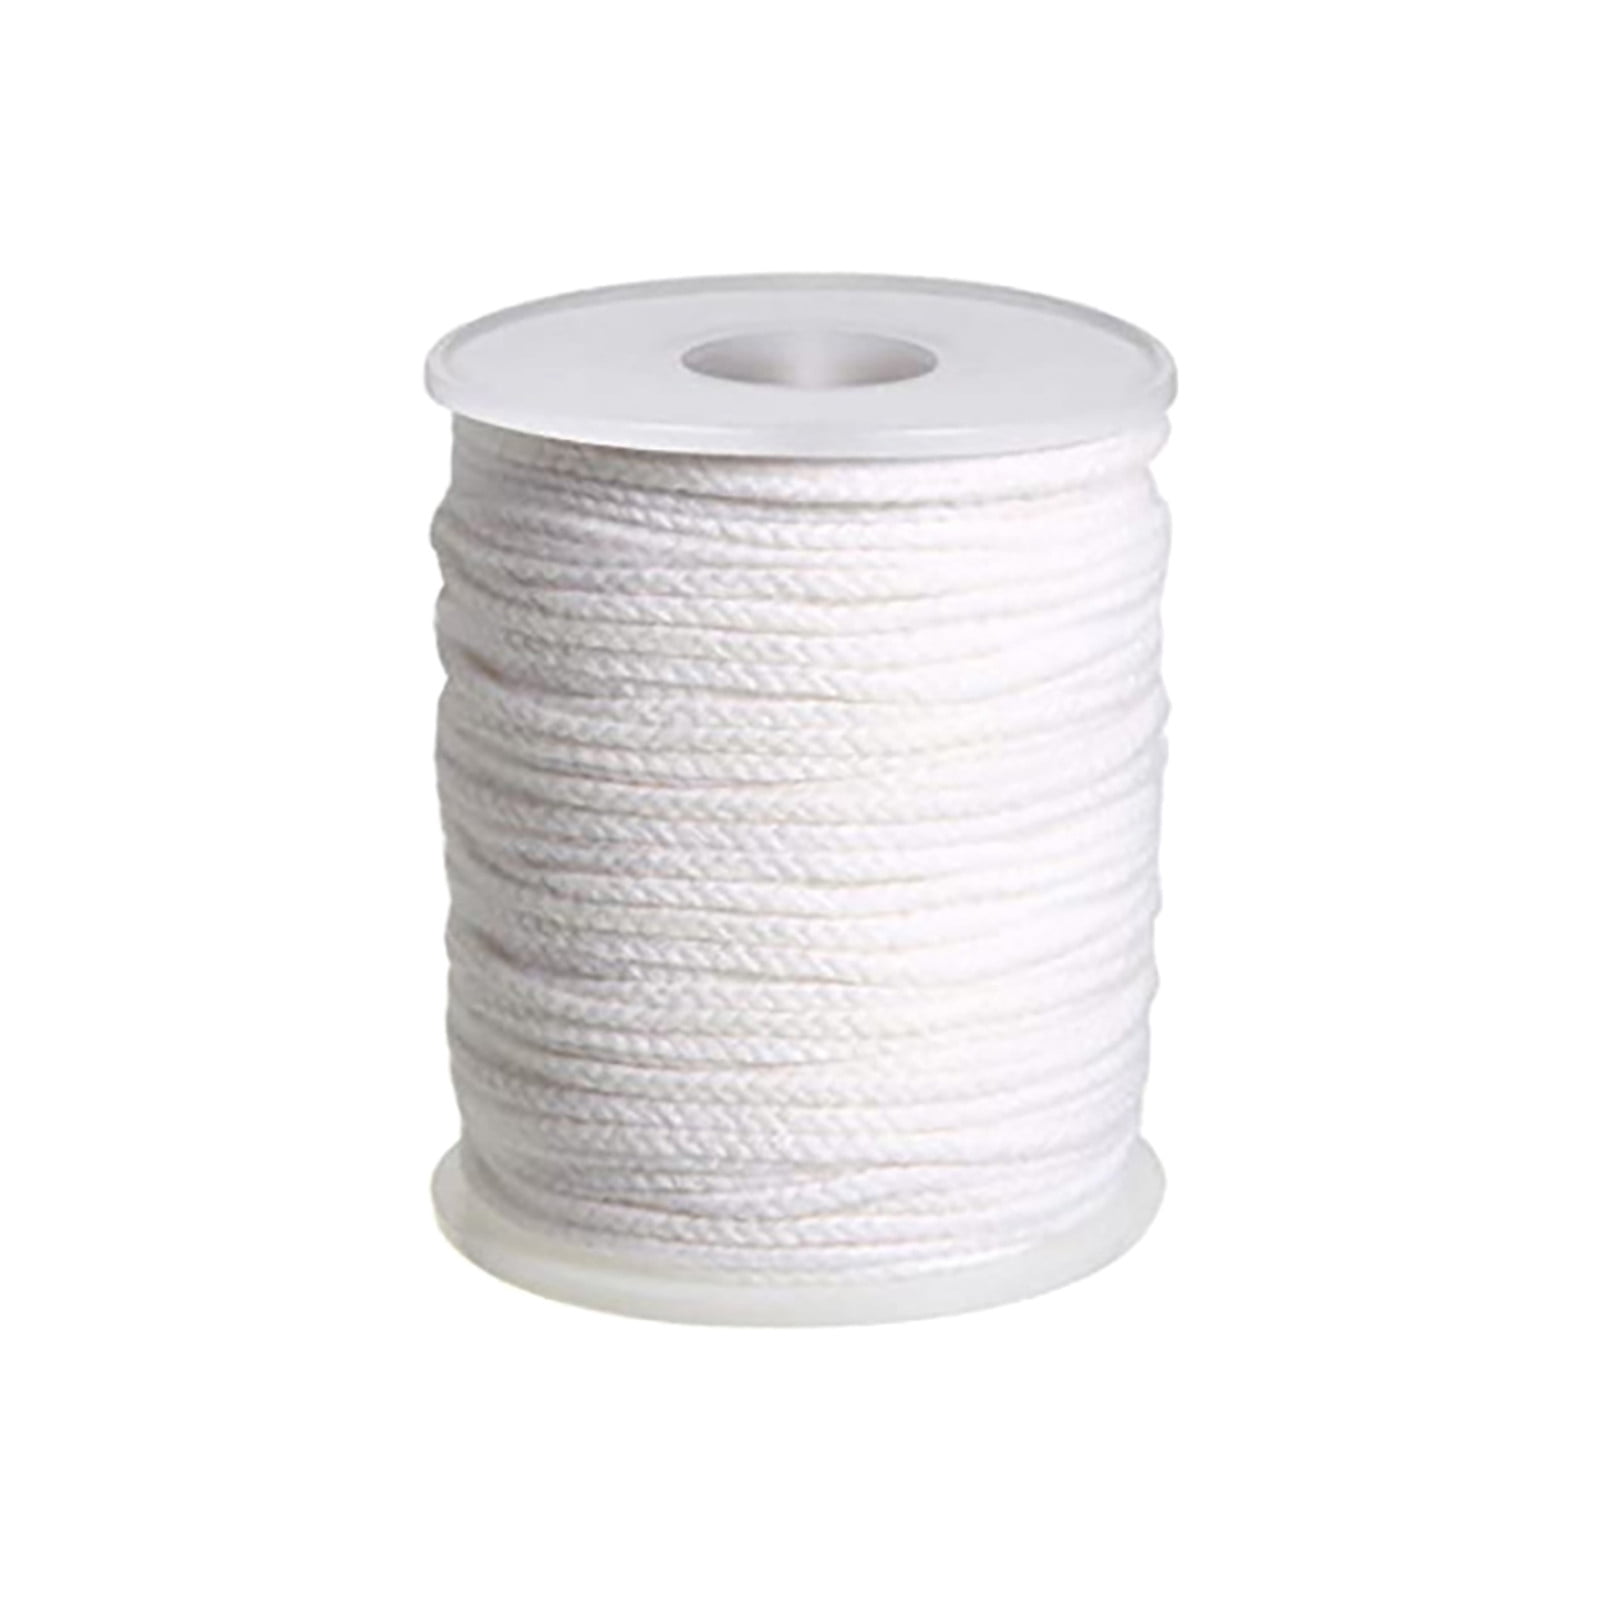 Eco-Friendly Candle Wick Spool 61m Candle Making Cotton Rope Spool White Smokeless Waxed Core for Candle Making Crafts Supplies Candle Wick